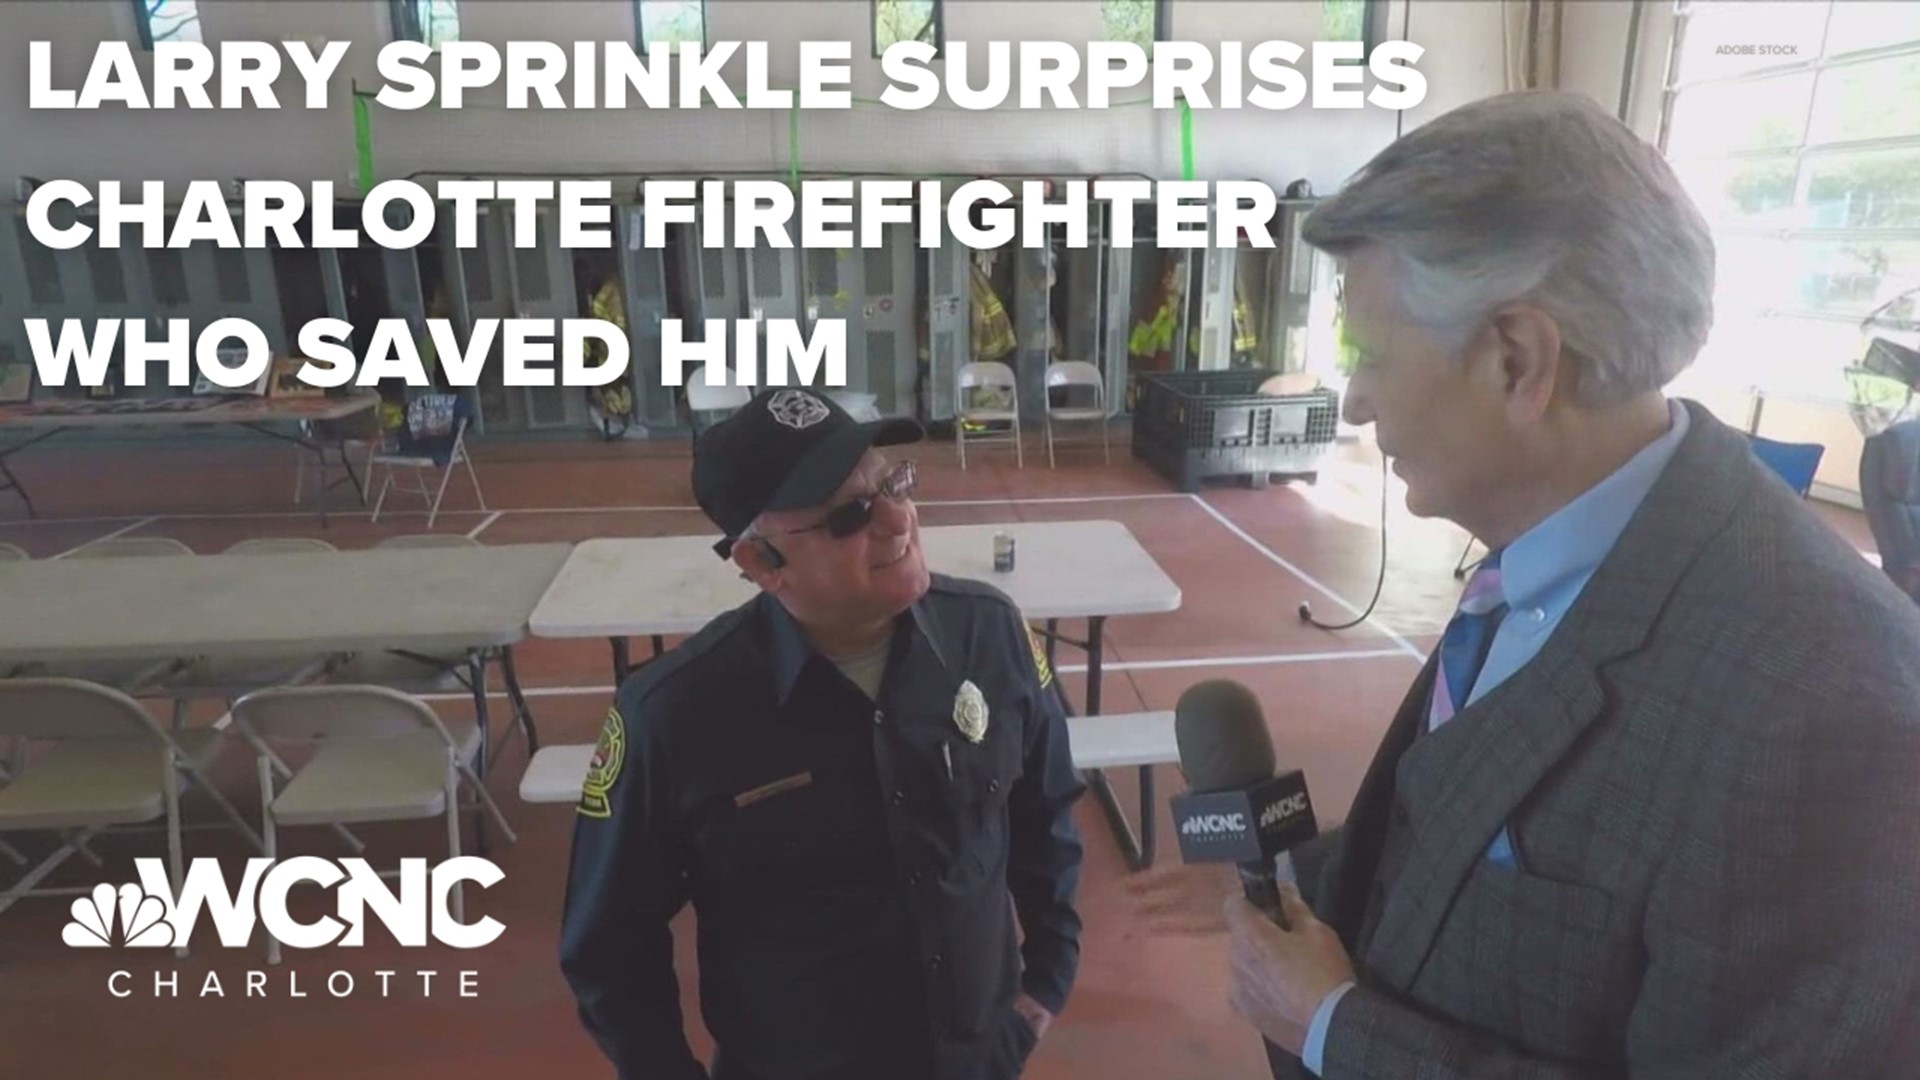 Firefighters from Fire Station 32 were among the first responders who quickly arrived at the scene after Larry Sprinkle was in a life-threatening crash in 2016.